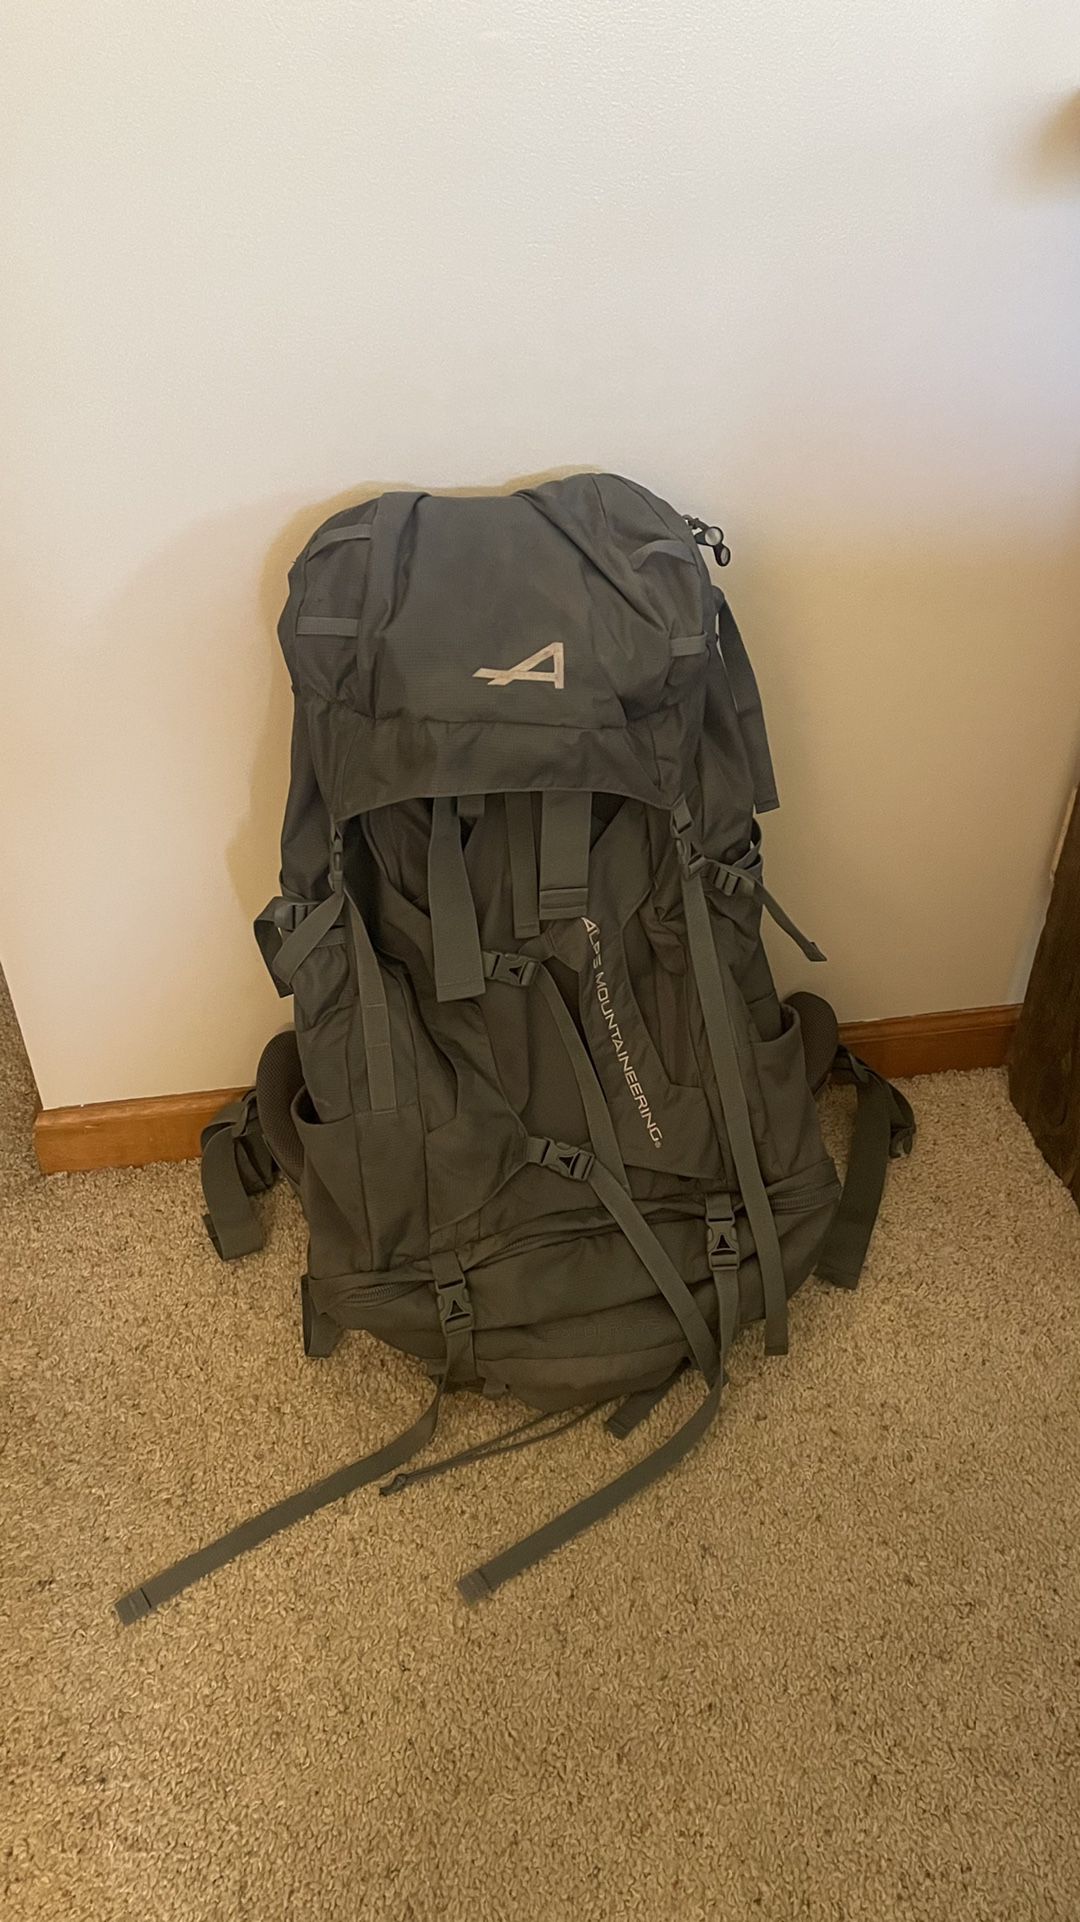 Large Hiking Backpack ( Used Once for A Week Long Backpacking Trip In Montana )